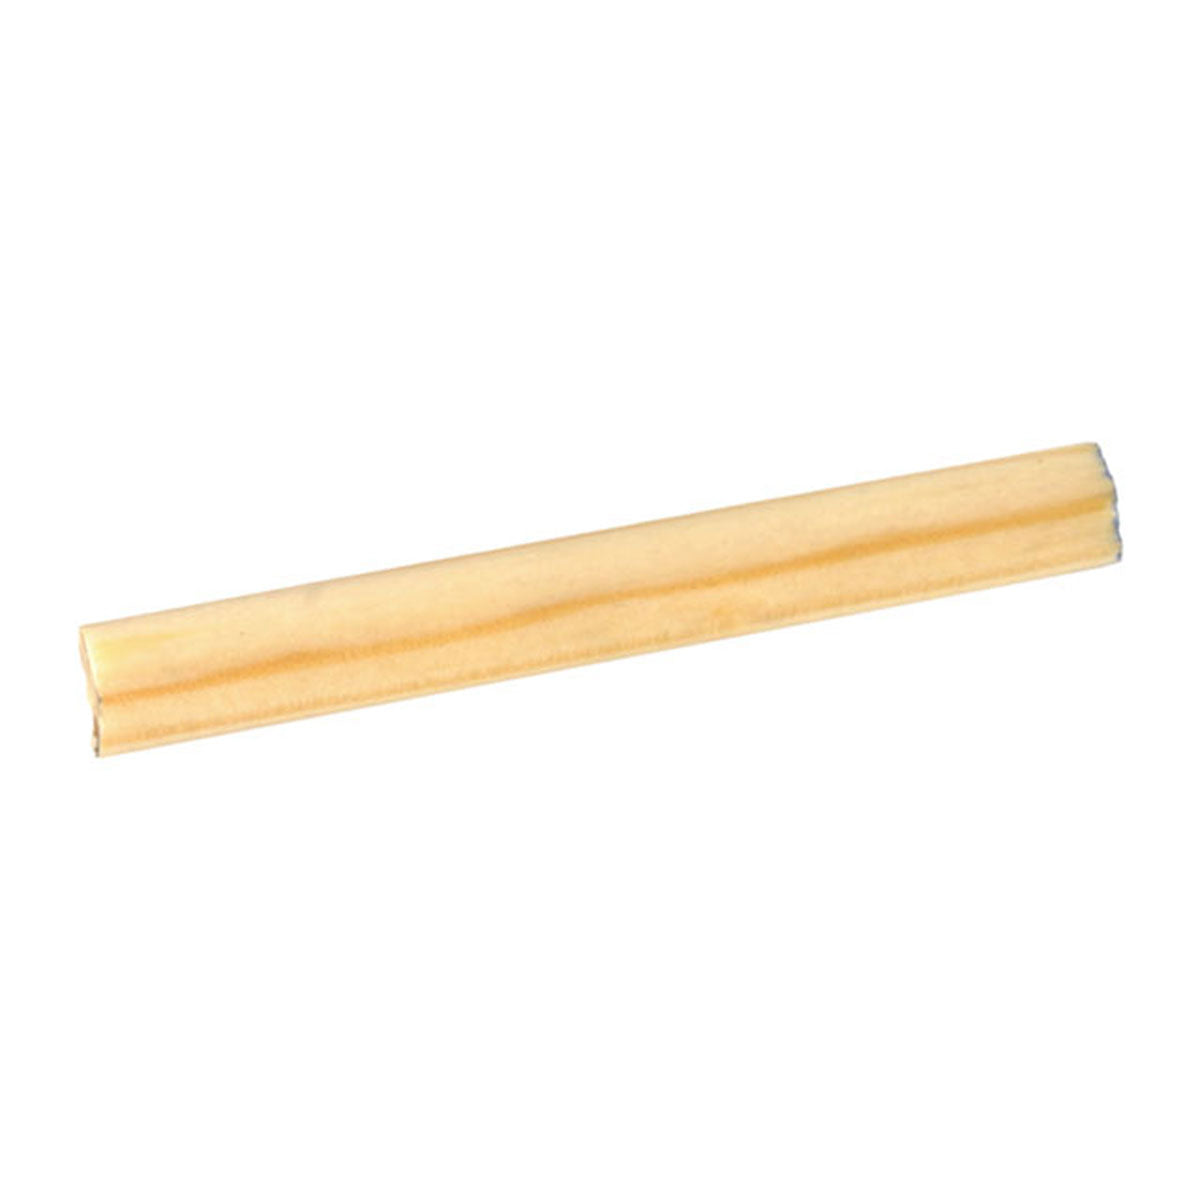 Wooden Dowel for Frog Gigs